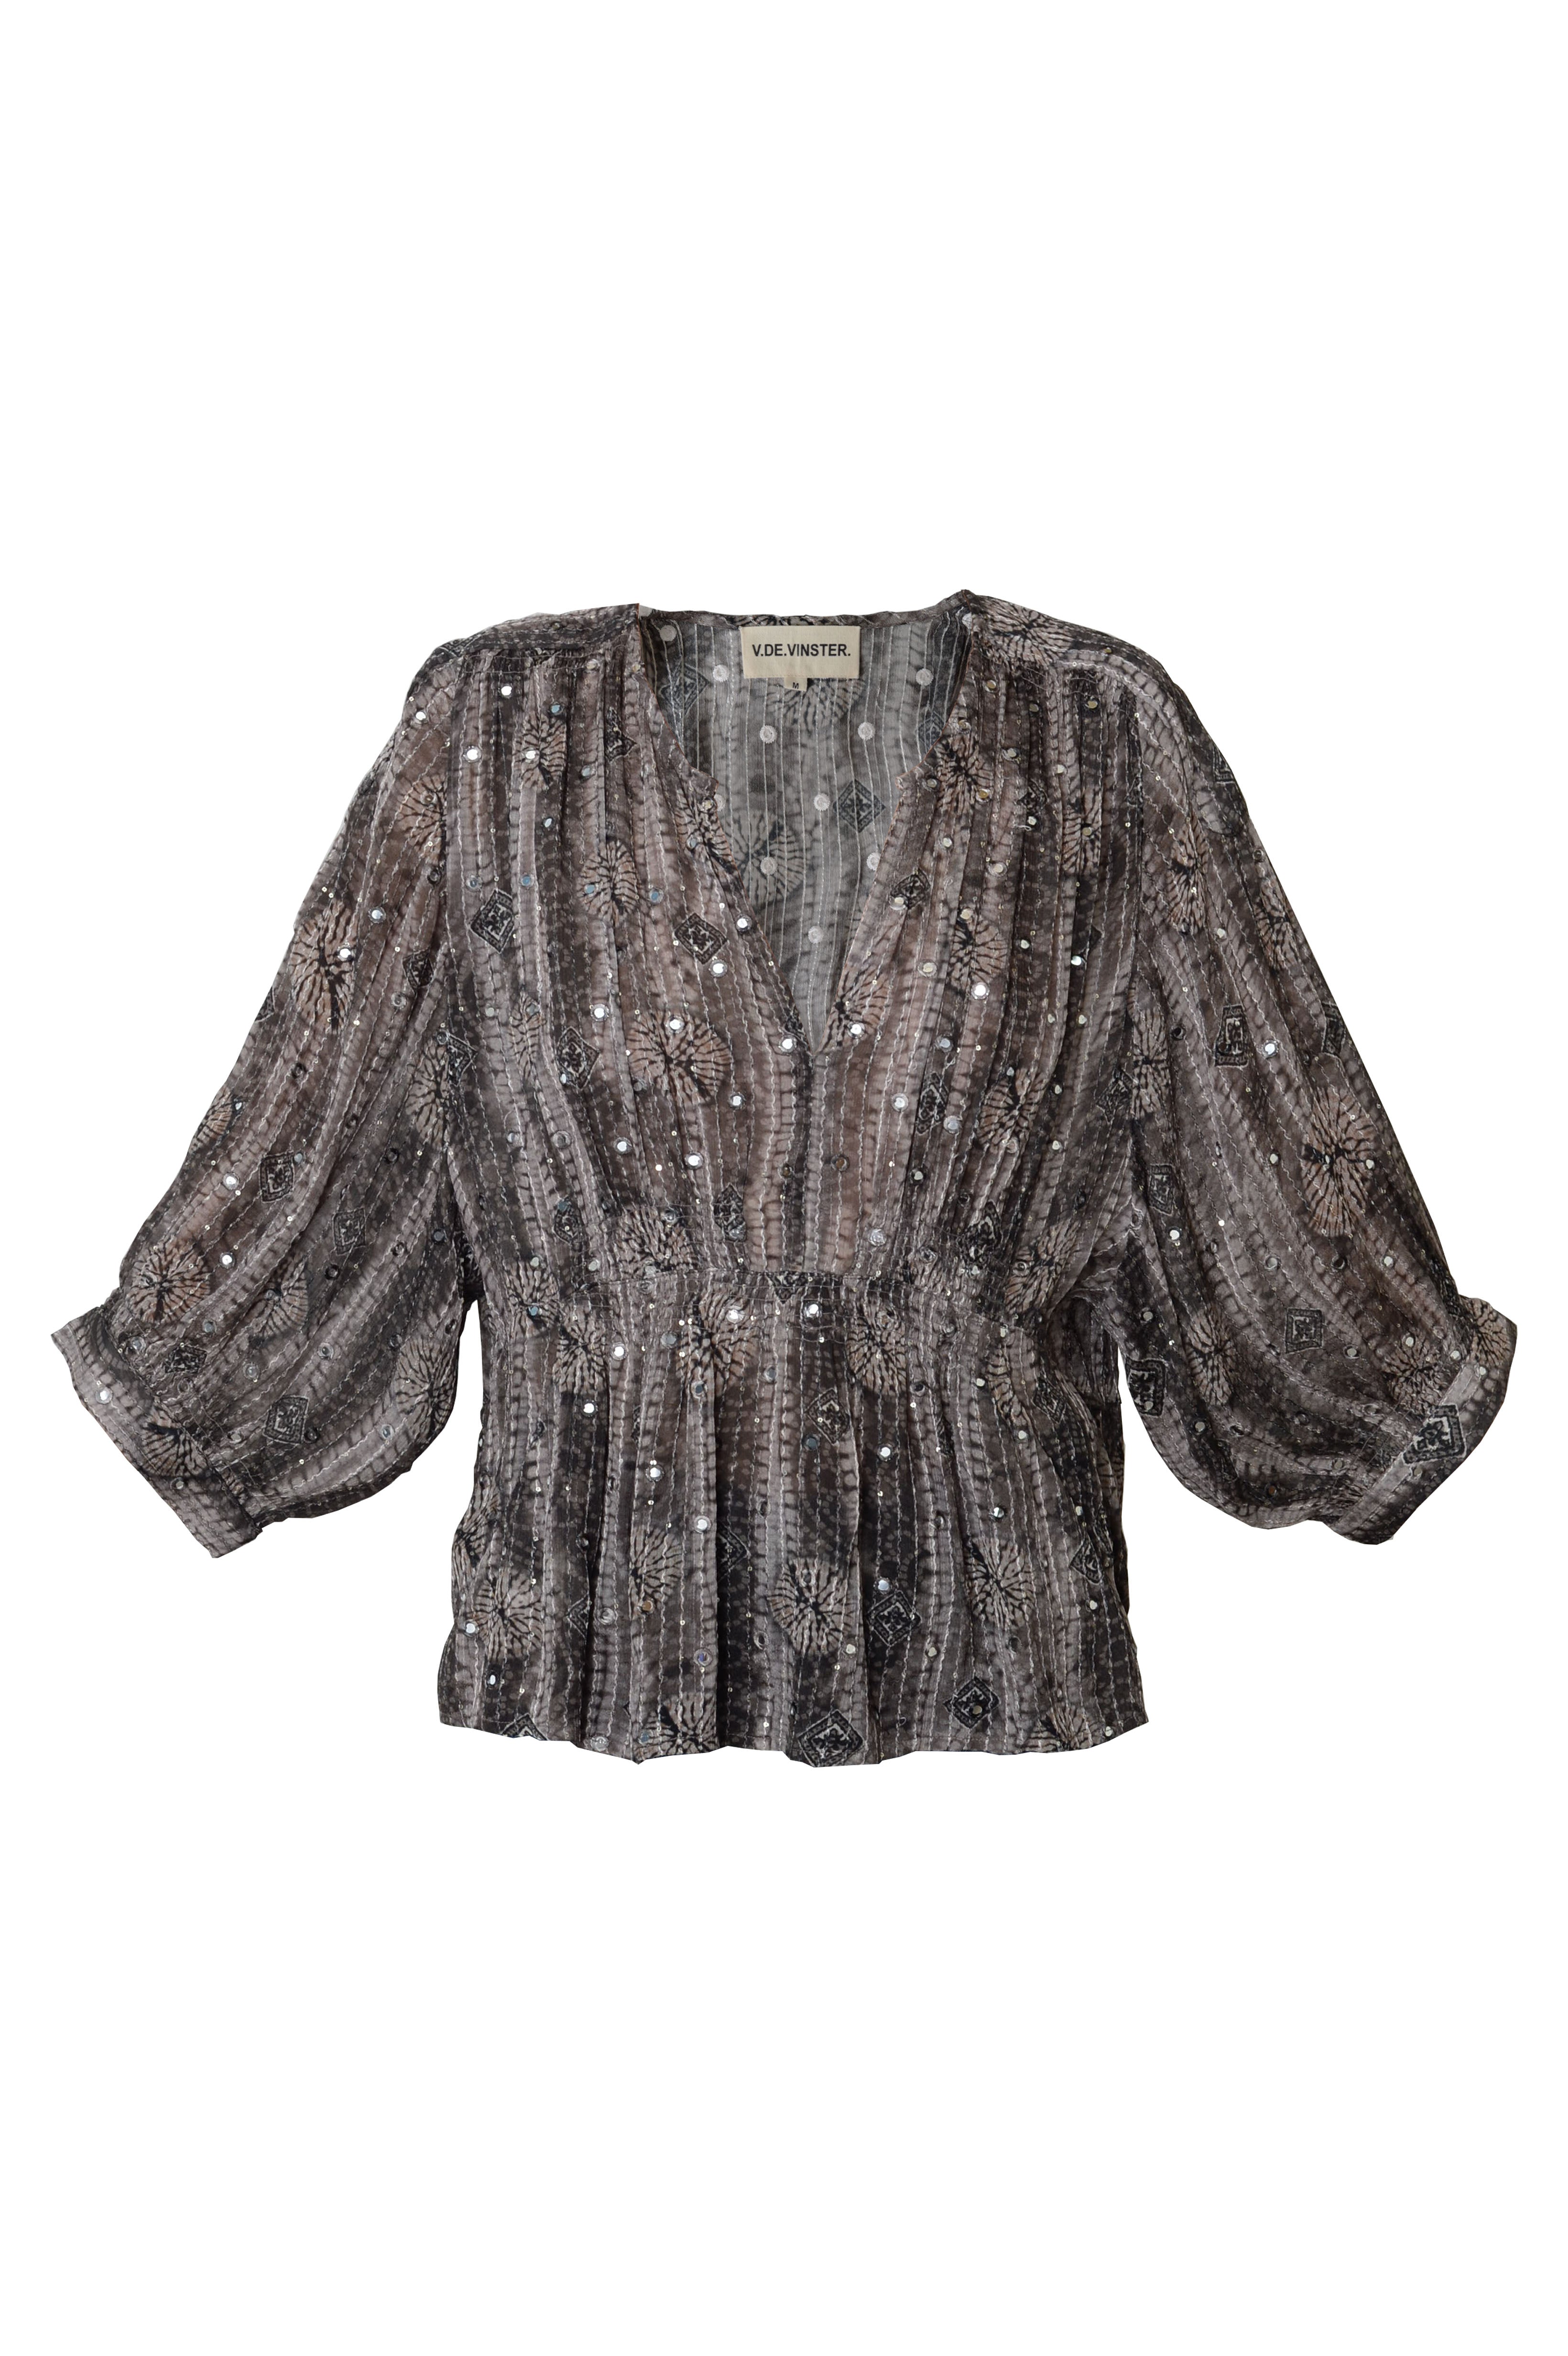 Black and gray rhinestone blouse party wear